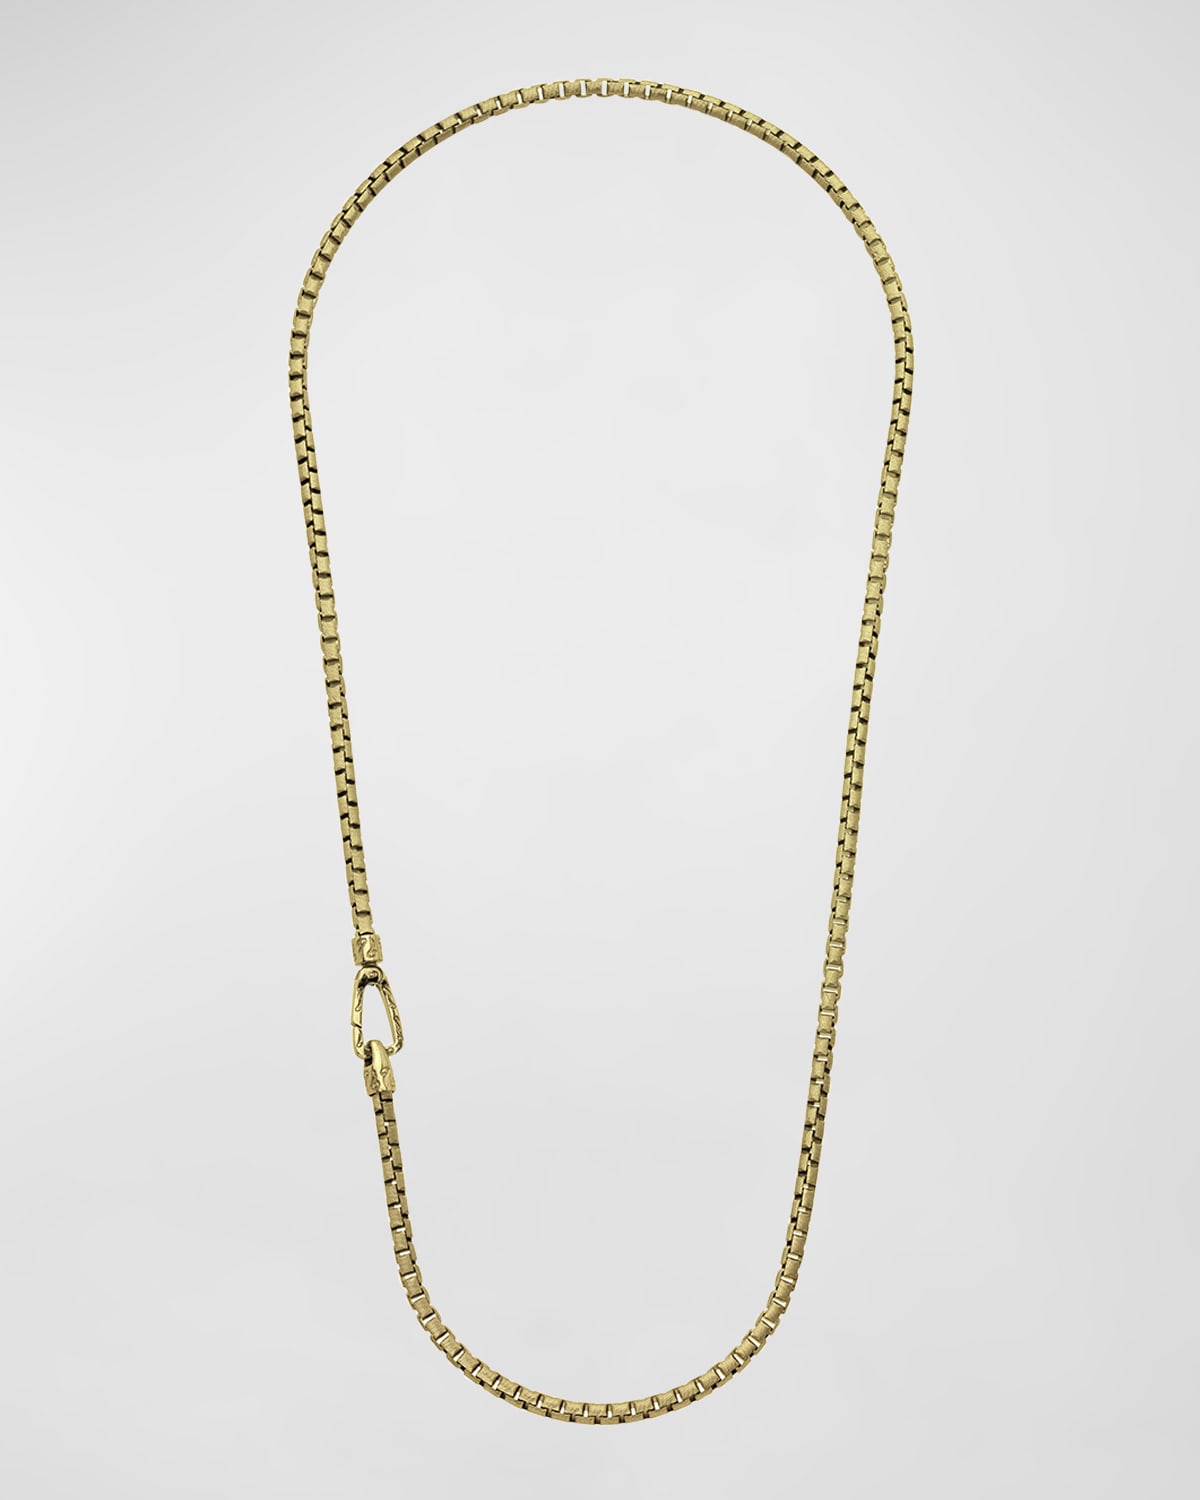 Marco Dal Maso Carved Tubular Yellow Gold Plated Silver Necklace With Matte Chain And Polished Clasp, 22"l